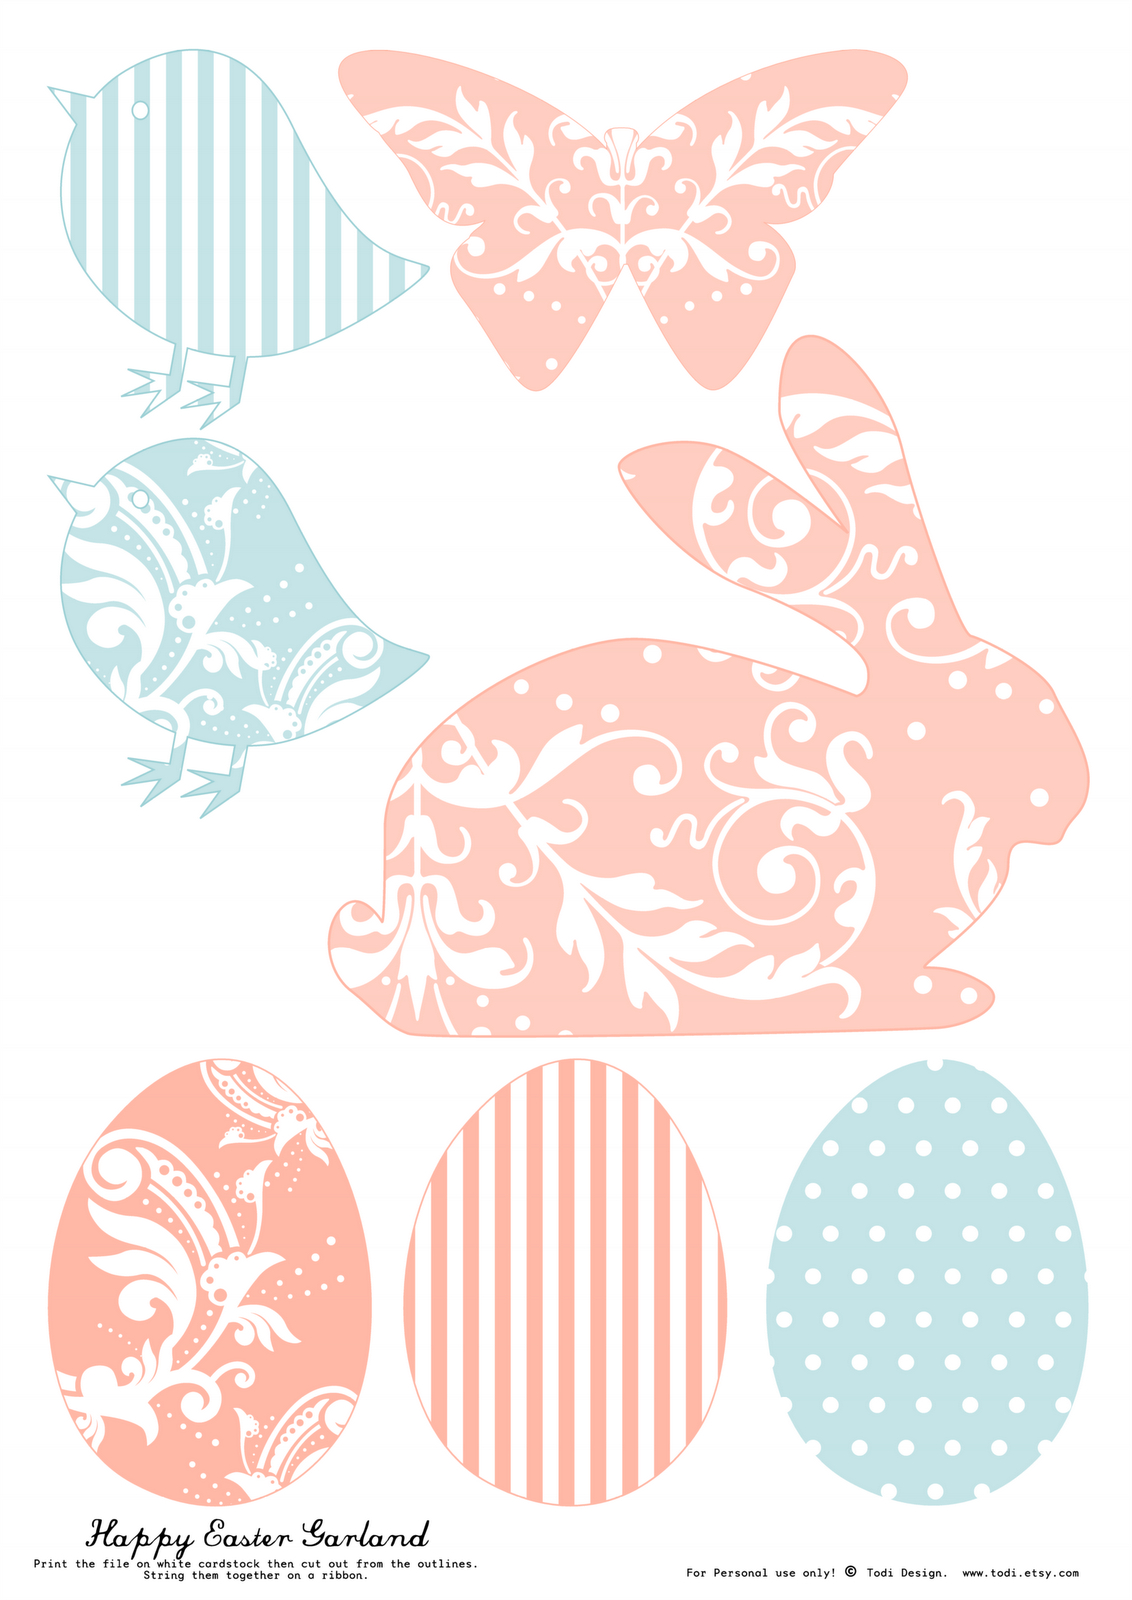 Todi: Free Printables For Easter Decoration. Th Print Used For This - Free Printable Easter Decorations